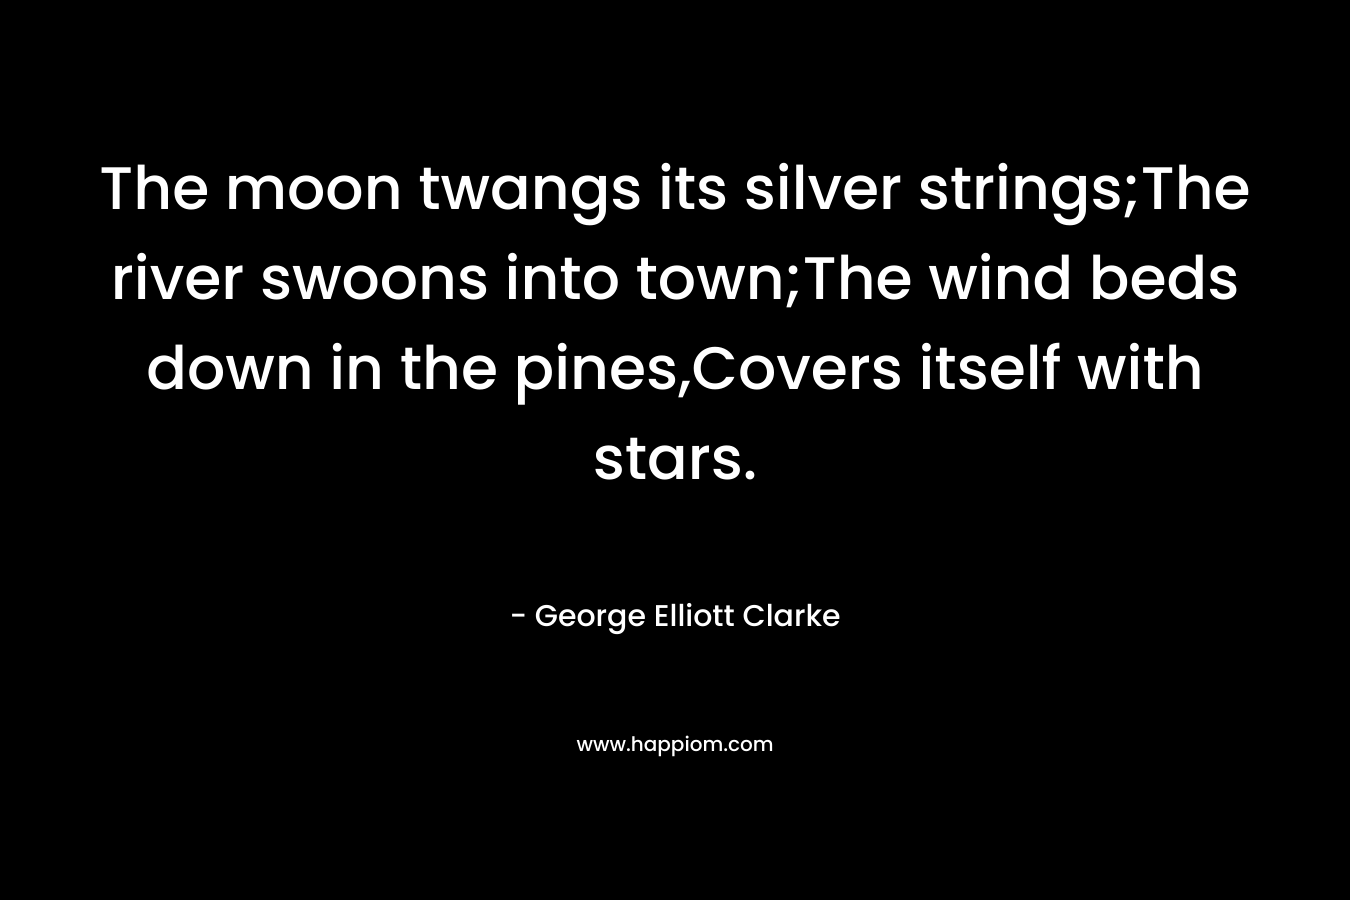 The moon twangs its silver strings;The river swoons into town;The wind beds down in the pines,Covers itself with stars.